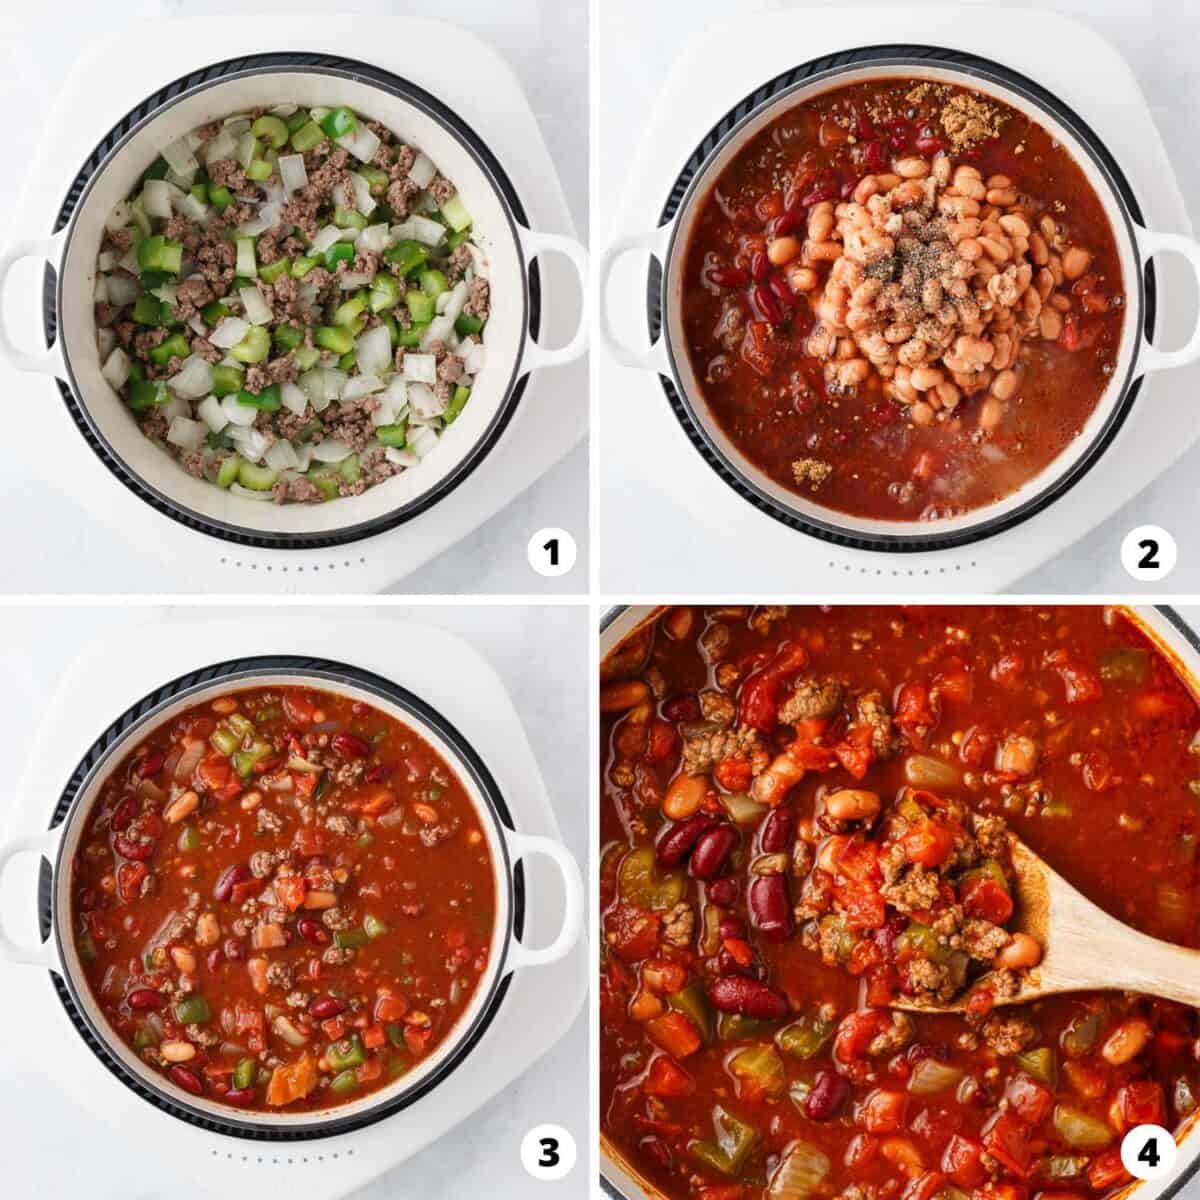 Showing how to make Wendy's chili in a 4 step collage.